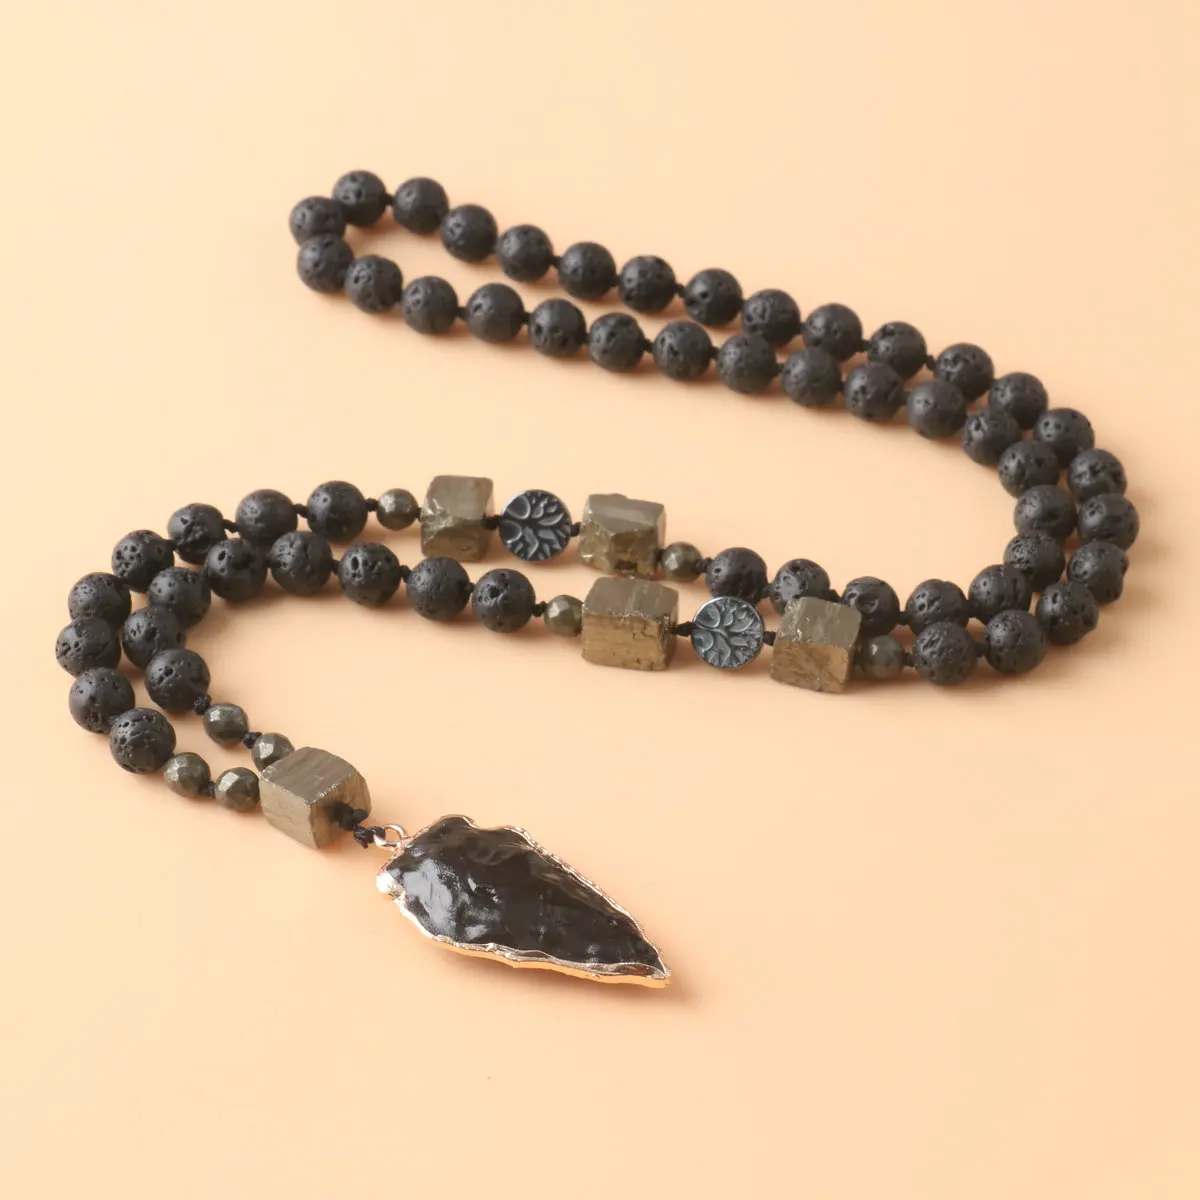 

Lava Obsidian Beaded Necklaces Healing Meditation Men Jewelry Knotted Gemstone Healing Crystal Pendant Obsidian Arrow Necklace